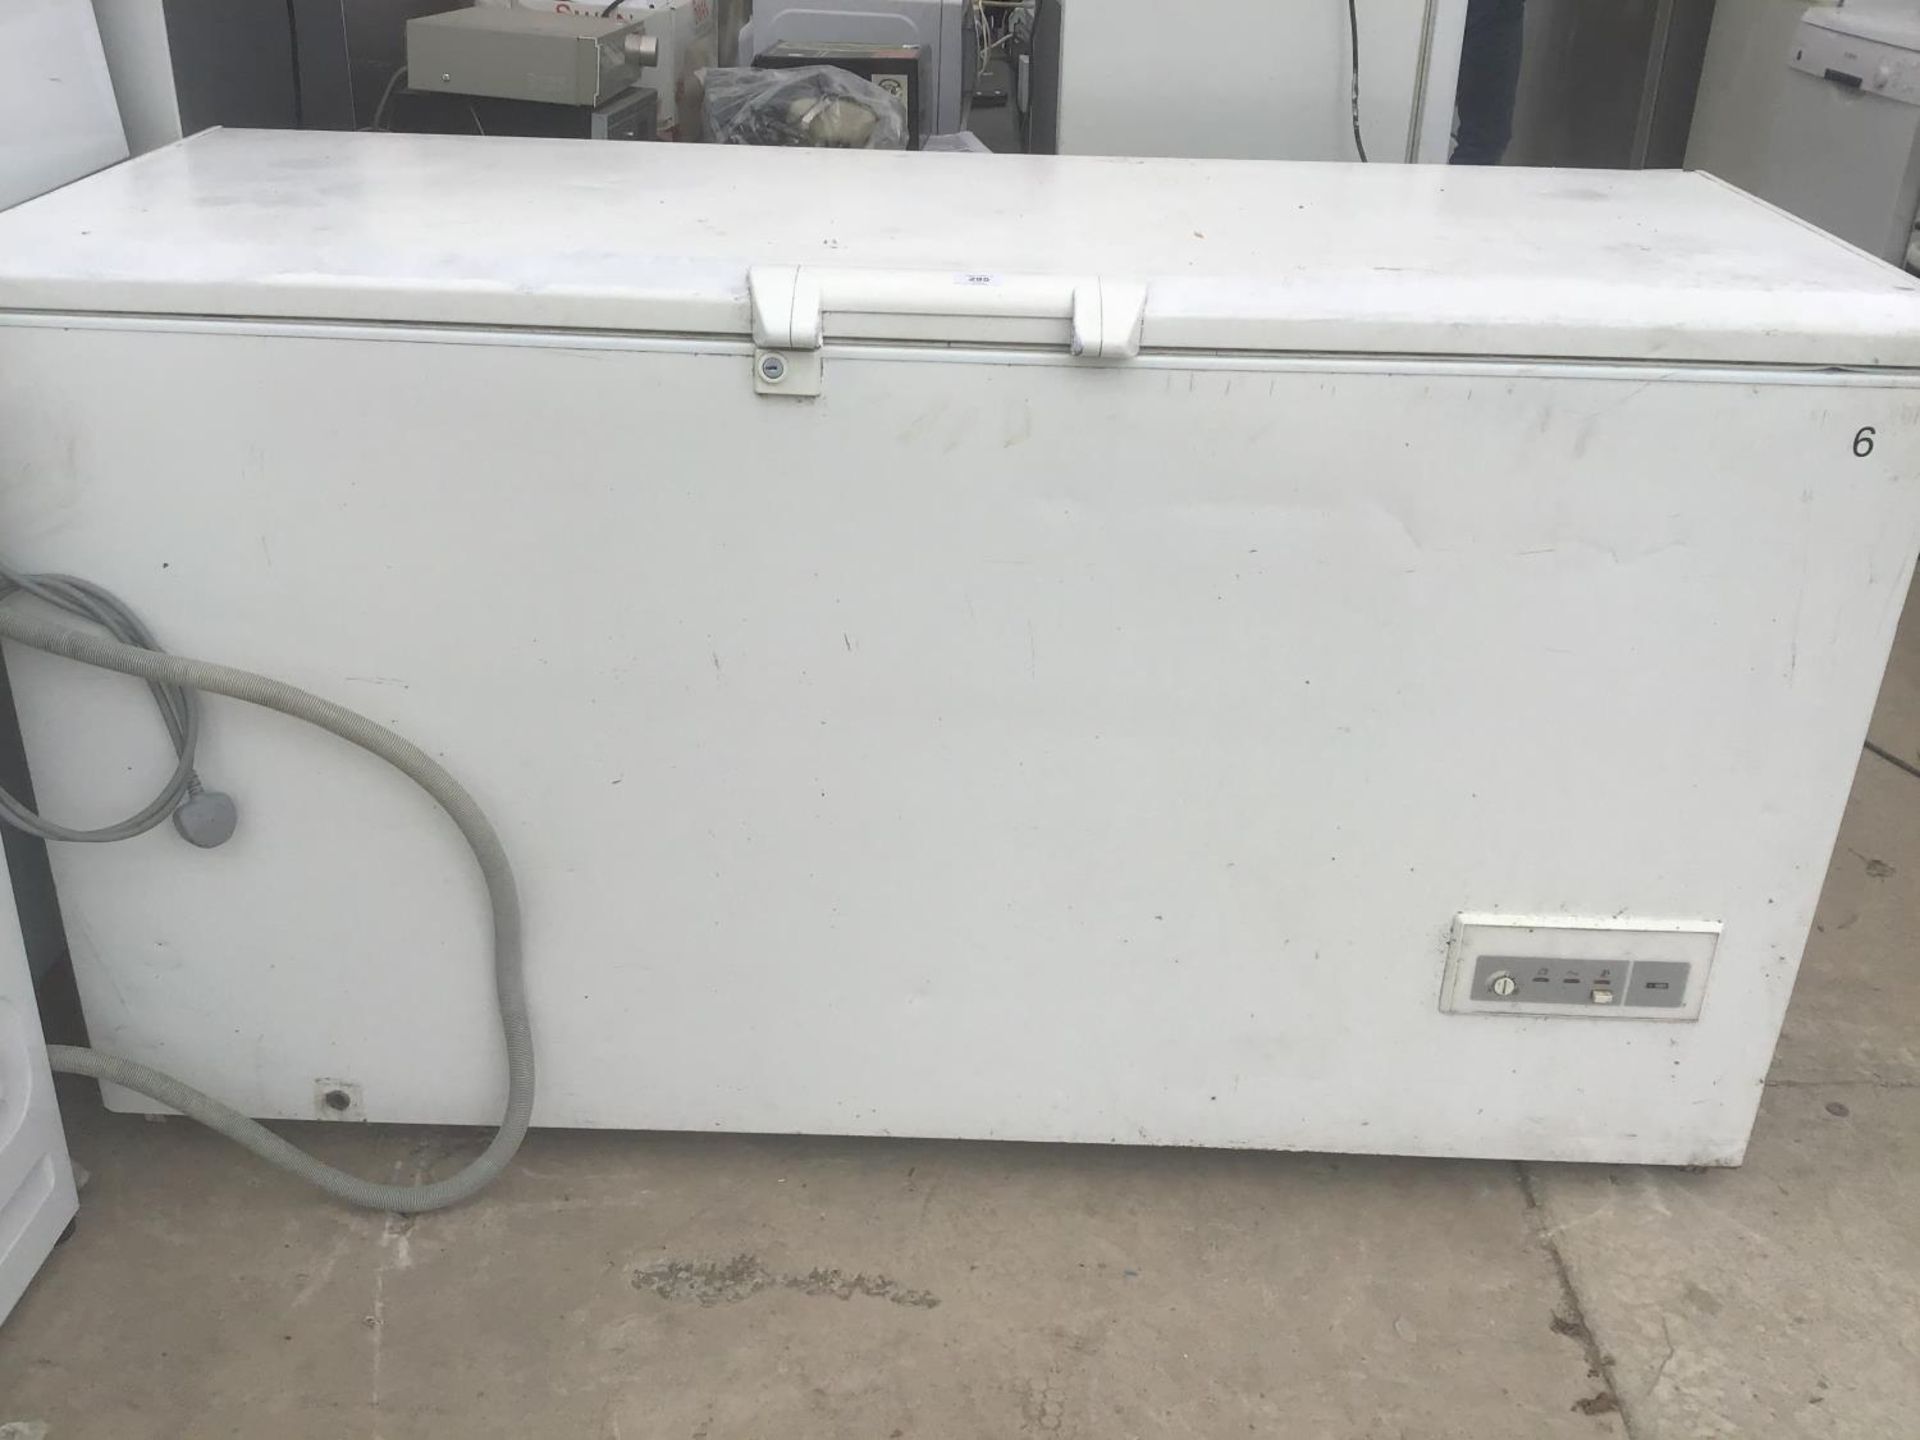 A LARGE CHEST FREEZER IN WORKING ORDER (DAMAGE TO HANDLE SEE PHOTO)